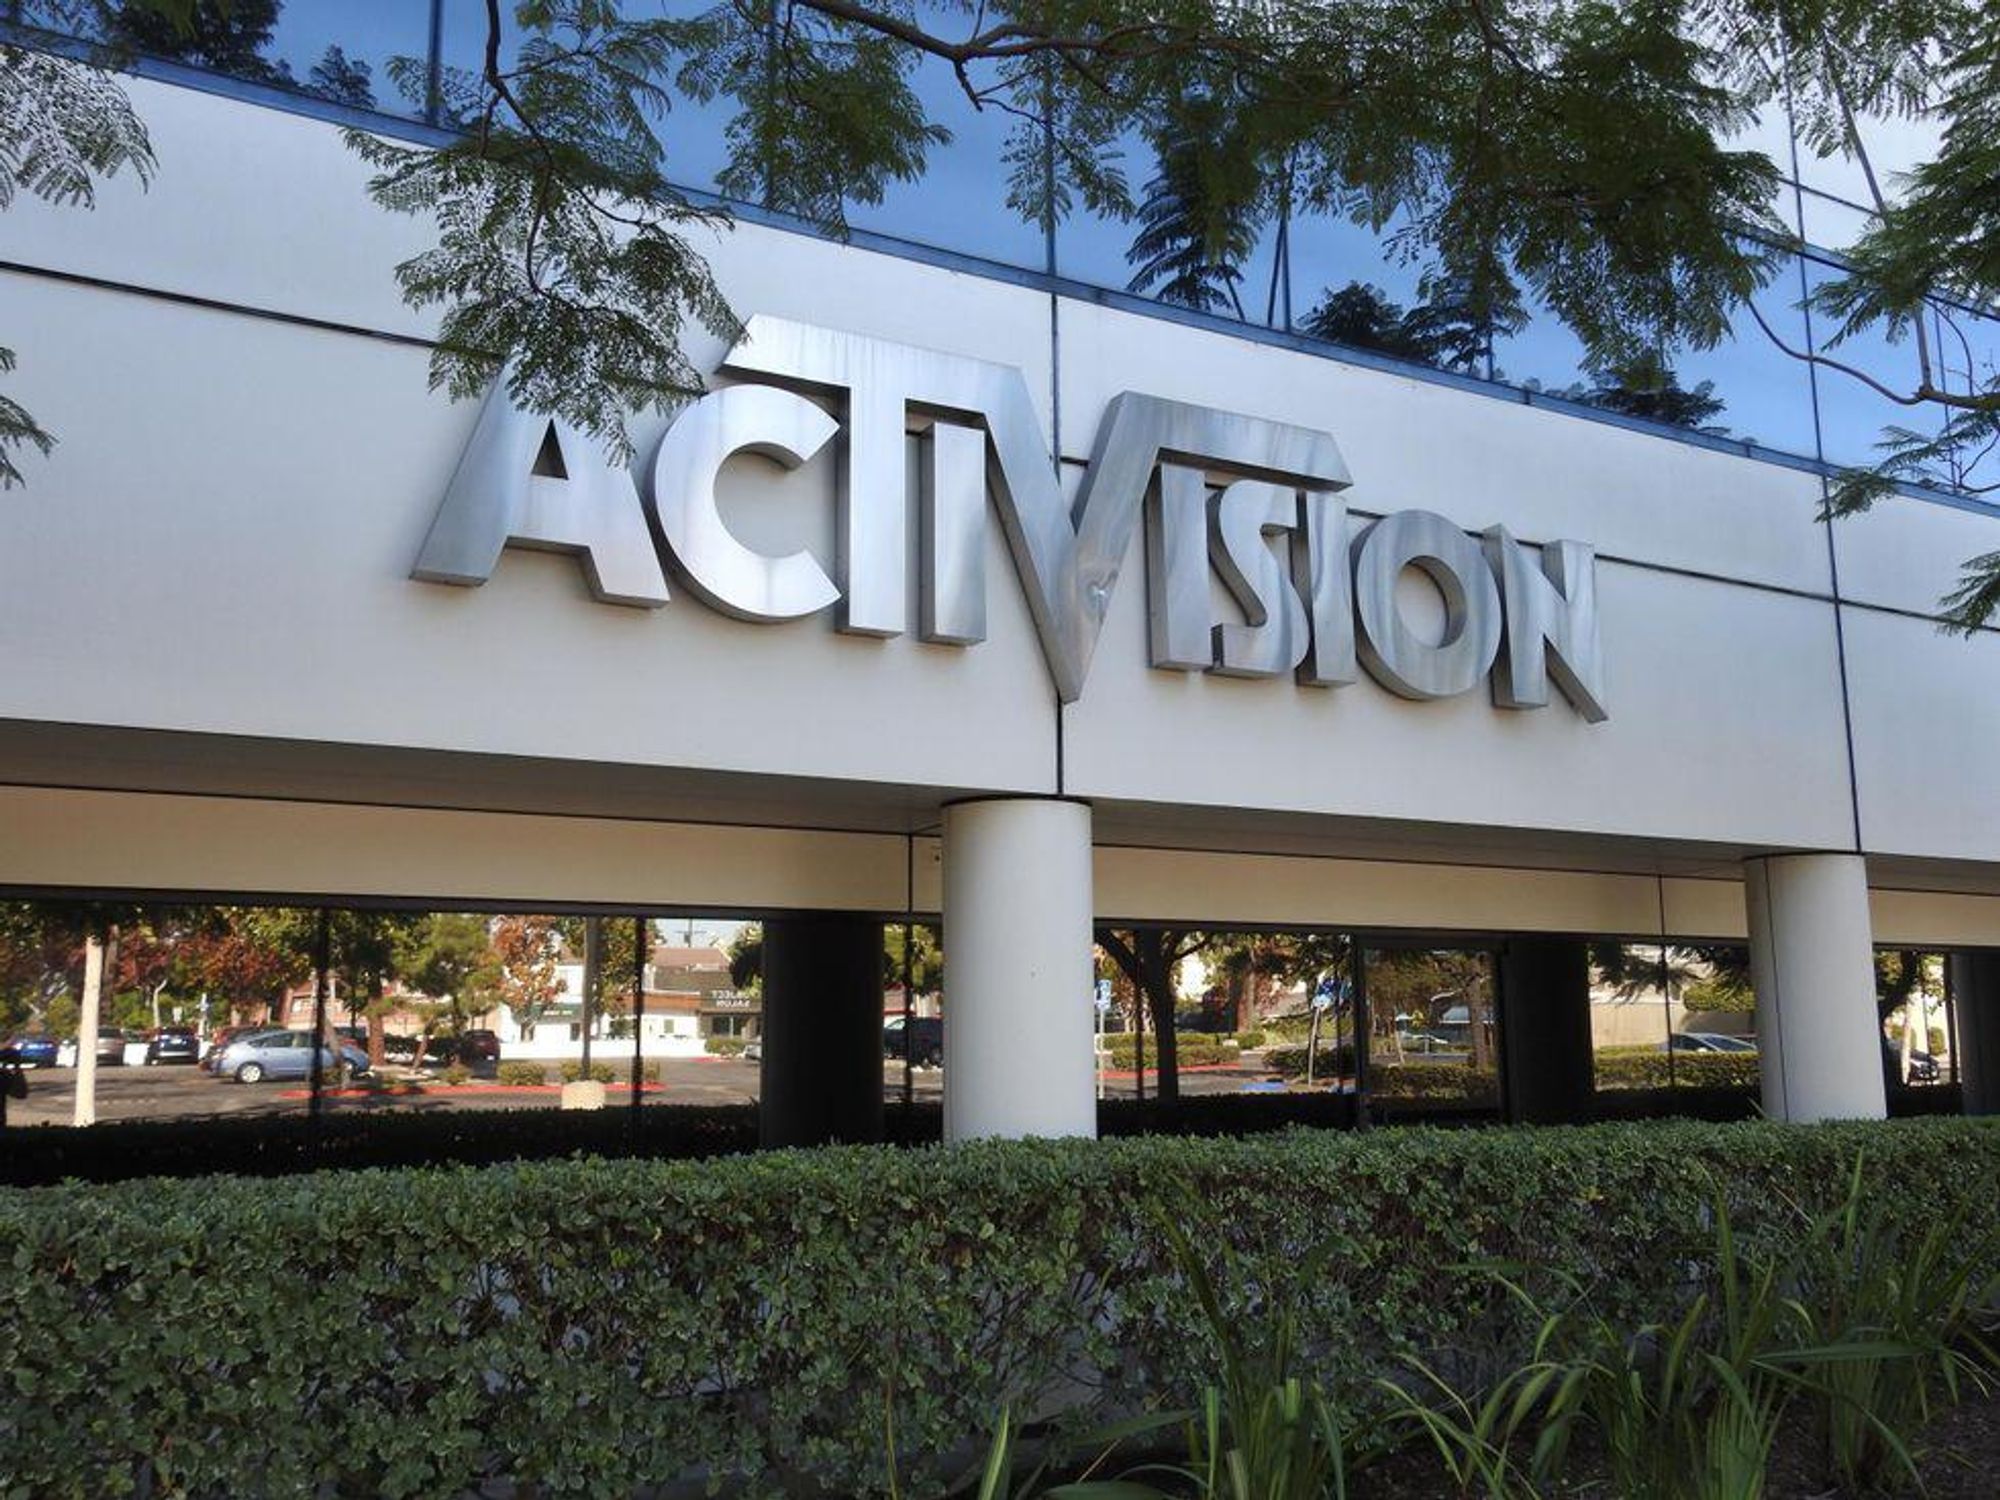 Why is the world divided by Microsoft's acquisition of Activision